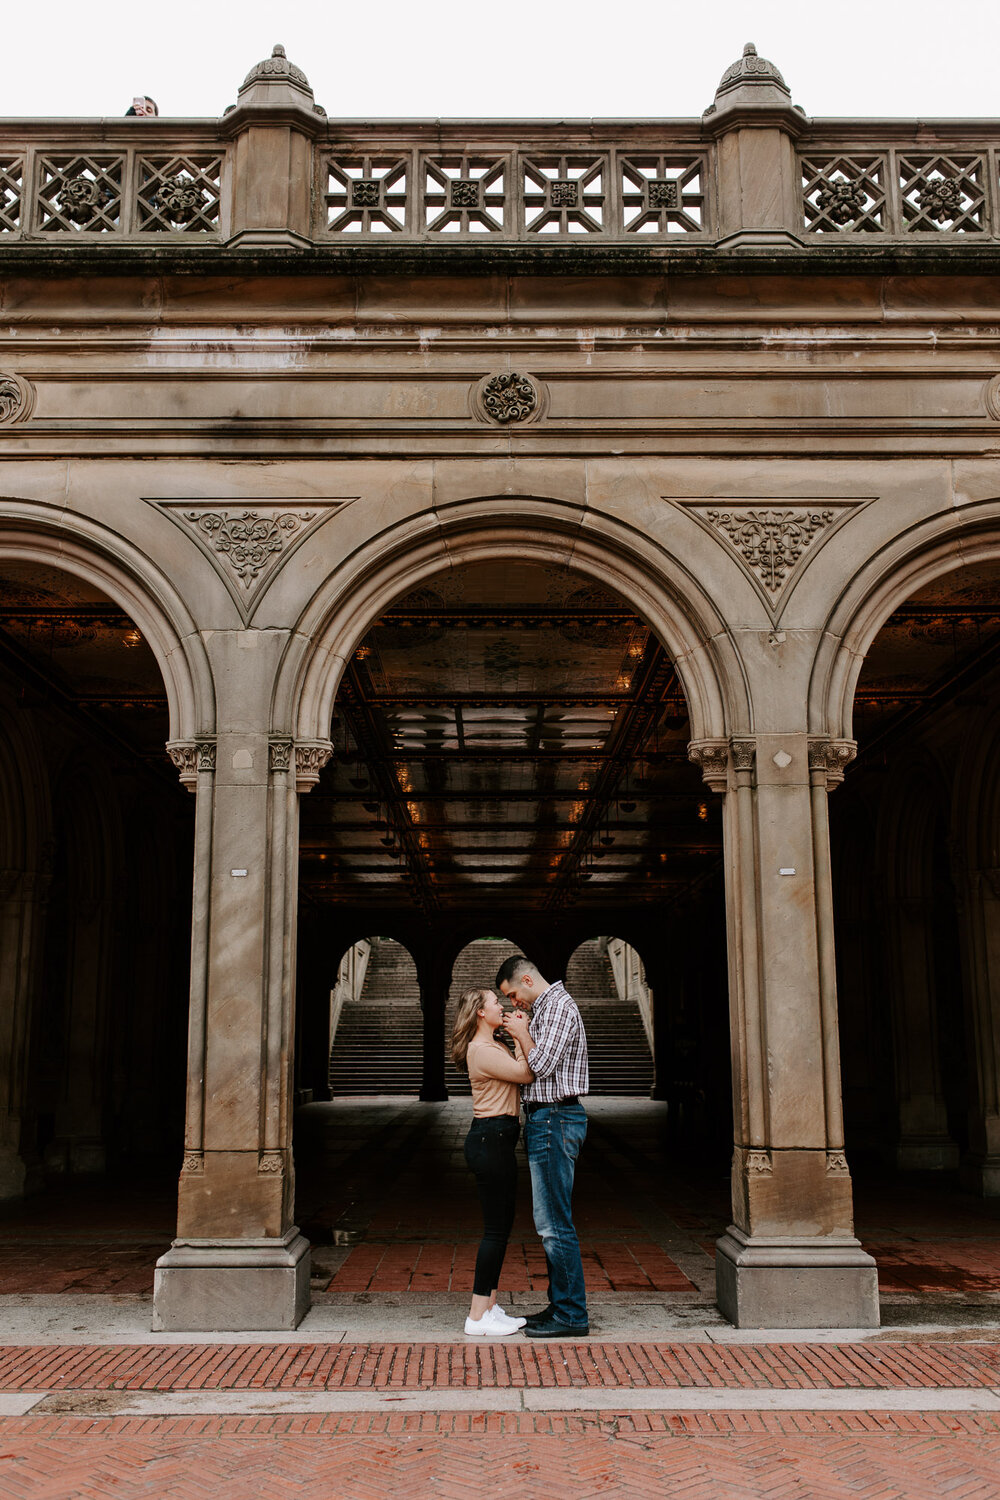 Central Park Fall Engagement by Kara McCurdy